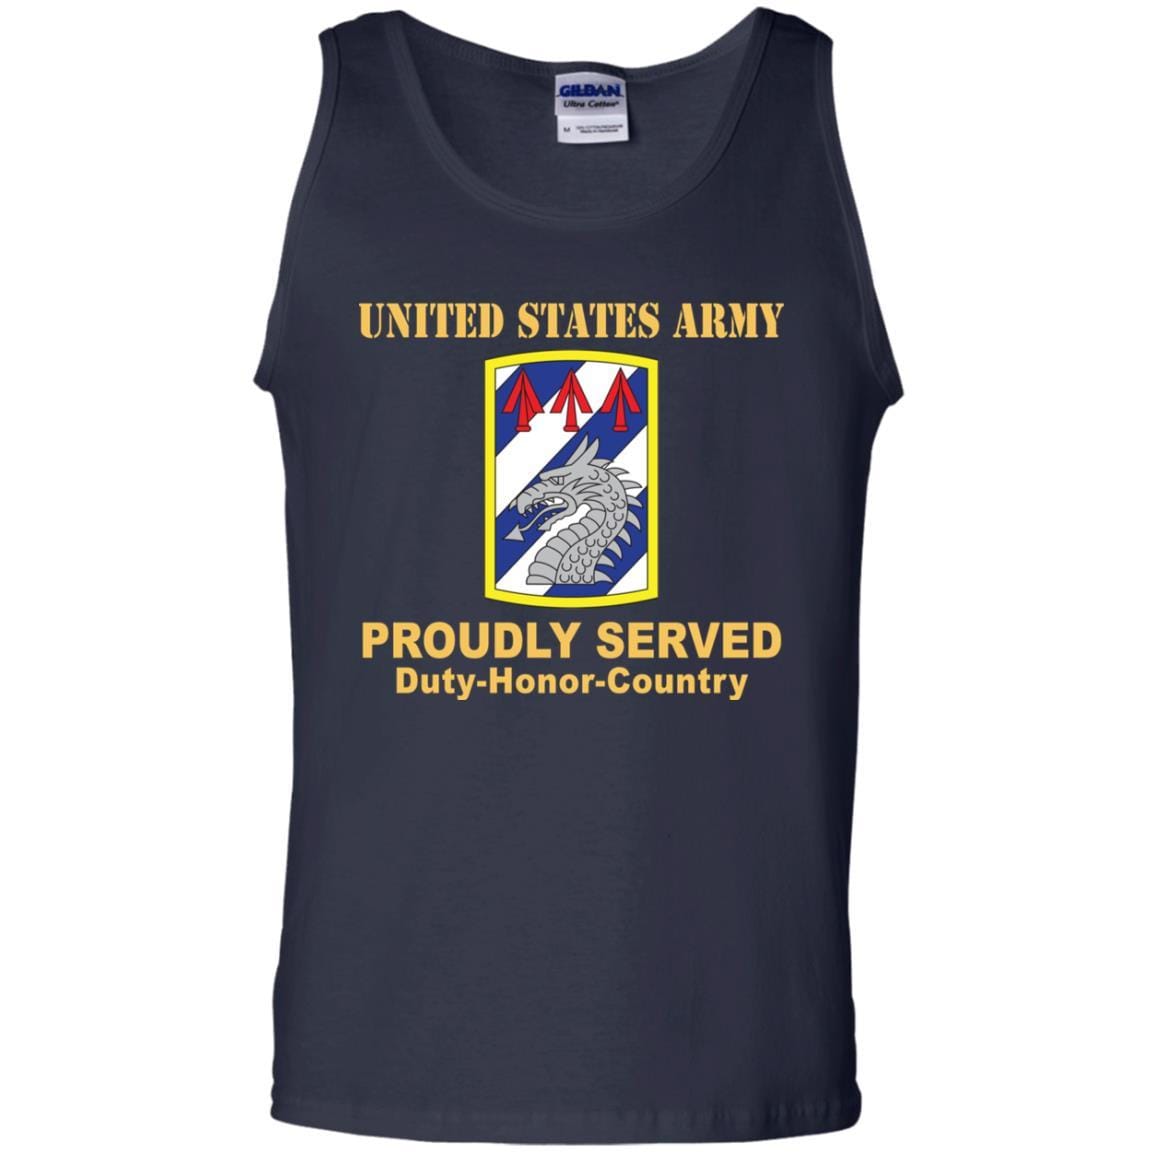 US ARMY 3RD SUSTAINMENT BRIGADE- Proudly Served T-Shirt On Front For Men-TShirt-Army-Veterans Nation